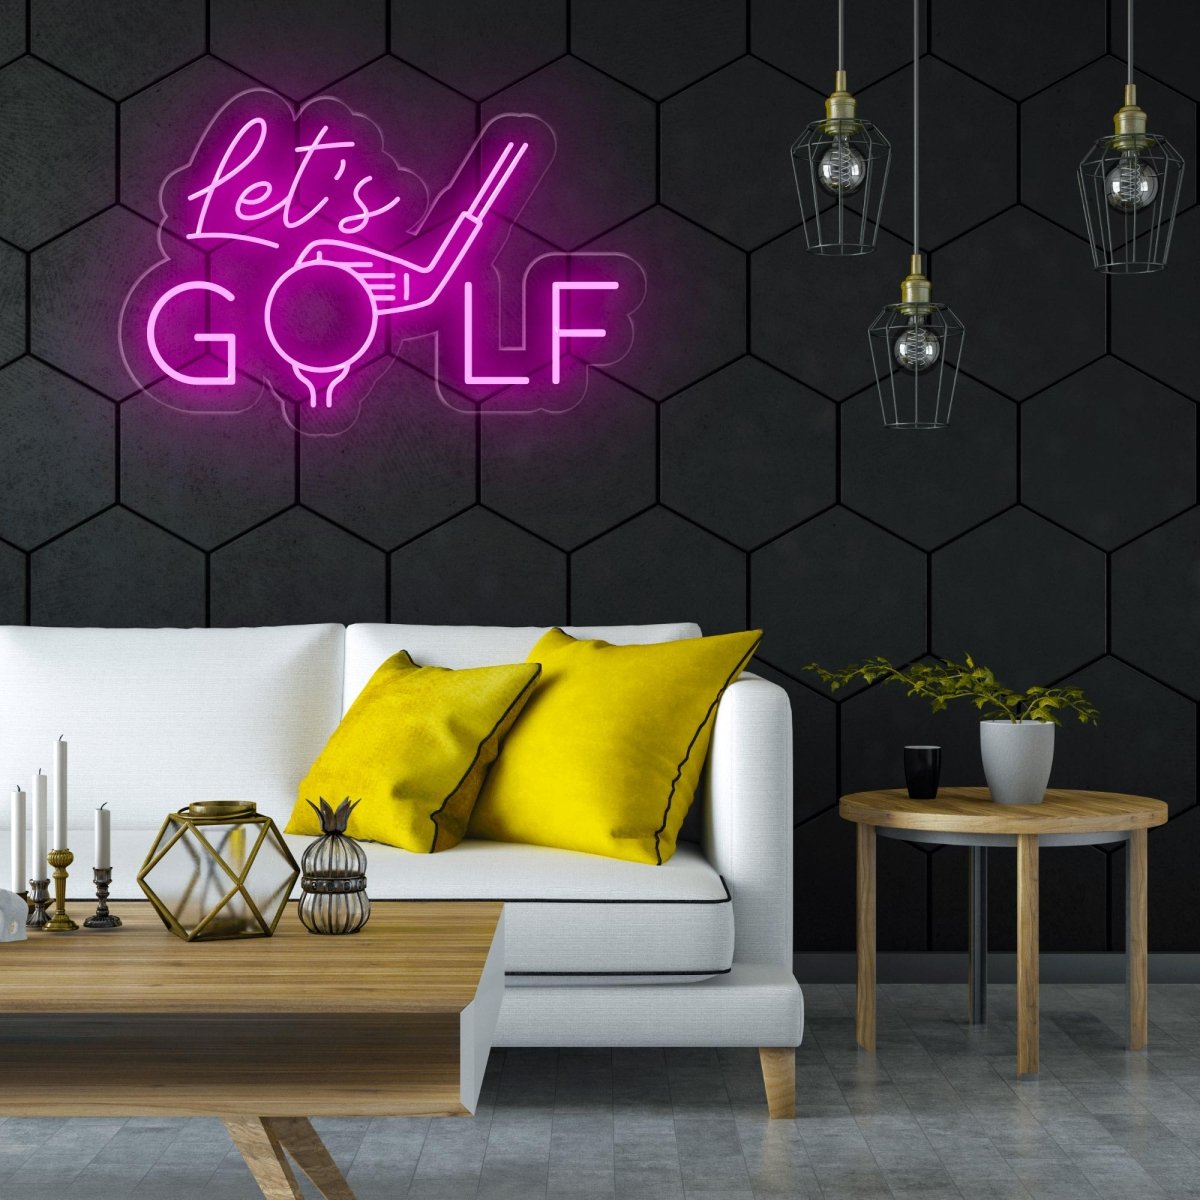 Let's Golf Neon Sign - Elevate Your Golfing Space - NEONXPERT